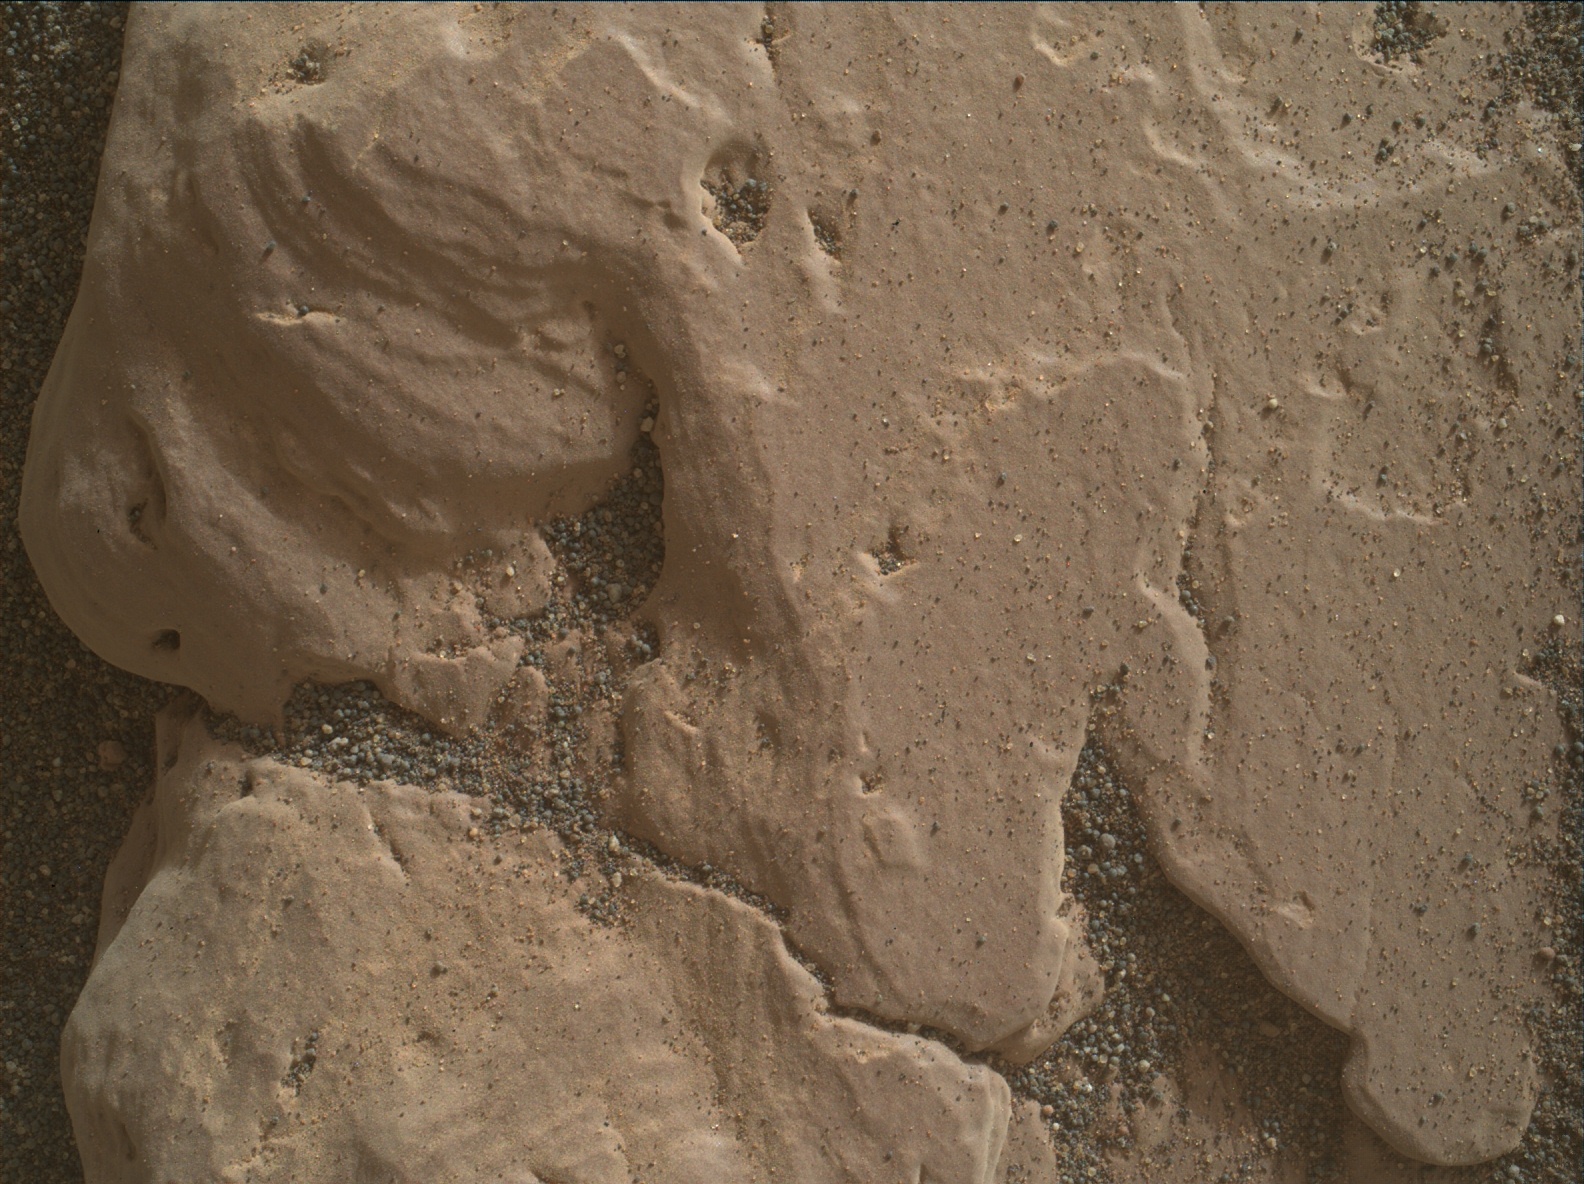 Nasa's Mars rover Curiosity acquired this image using its Mars Hand Lens Imager (MAHLI) on Sol 2364